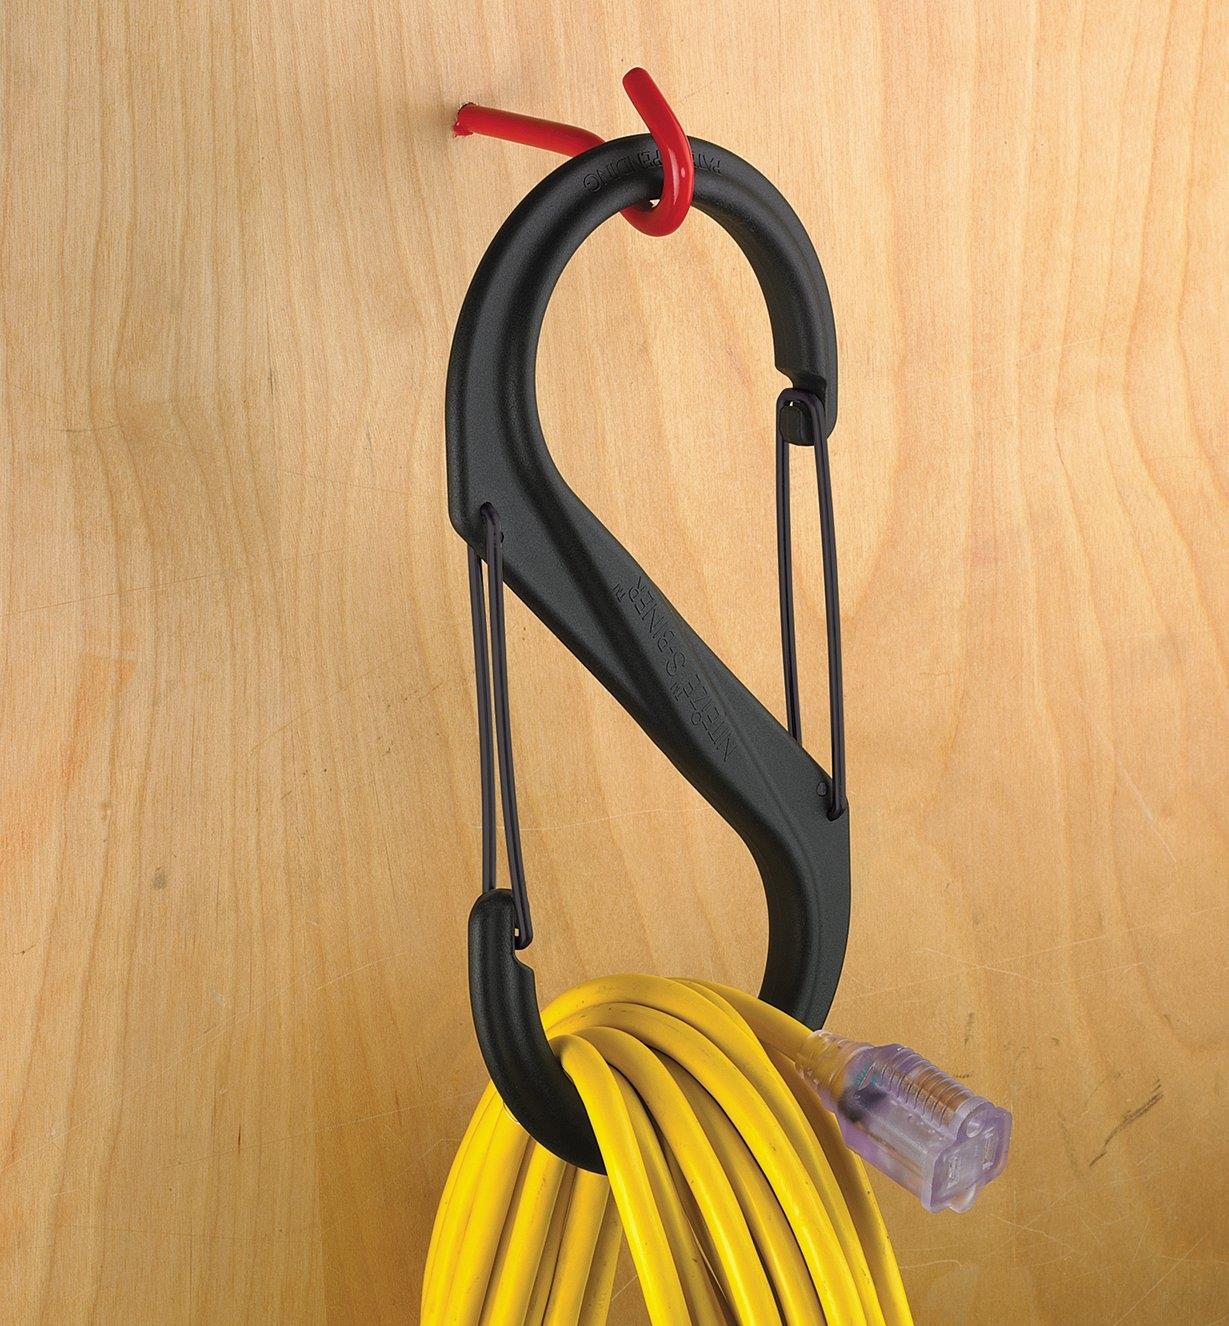 A coiled extension cord held in a 10 1/2" S-Biner hanging on a wall hook